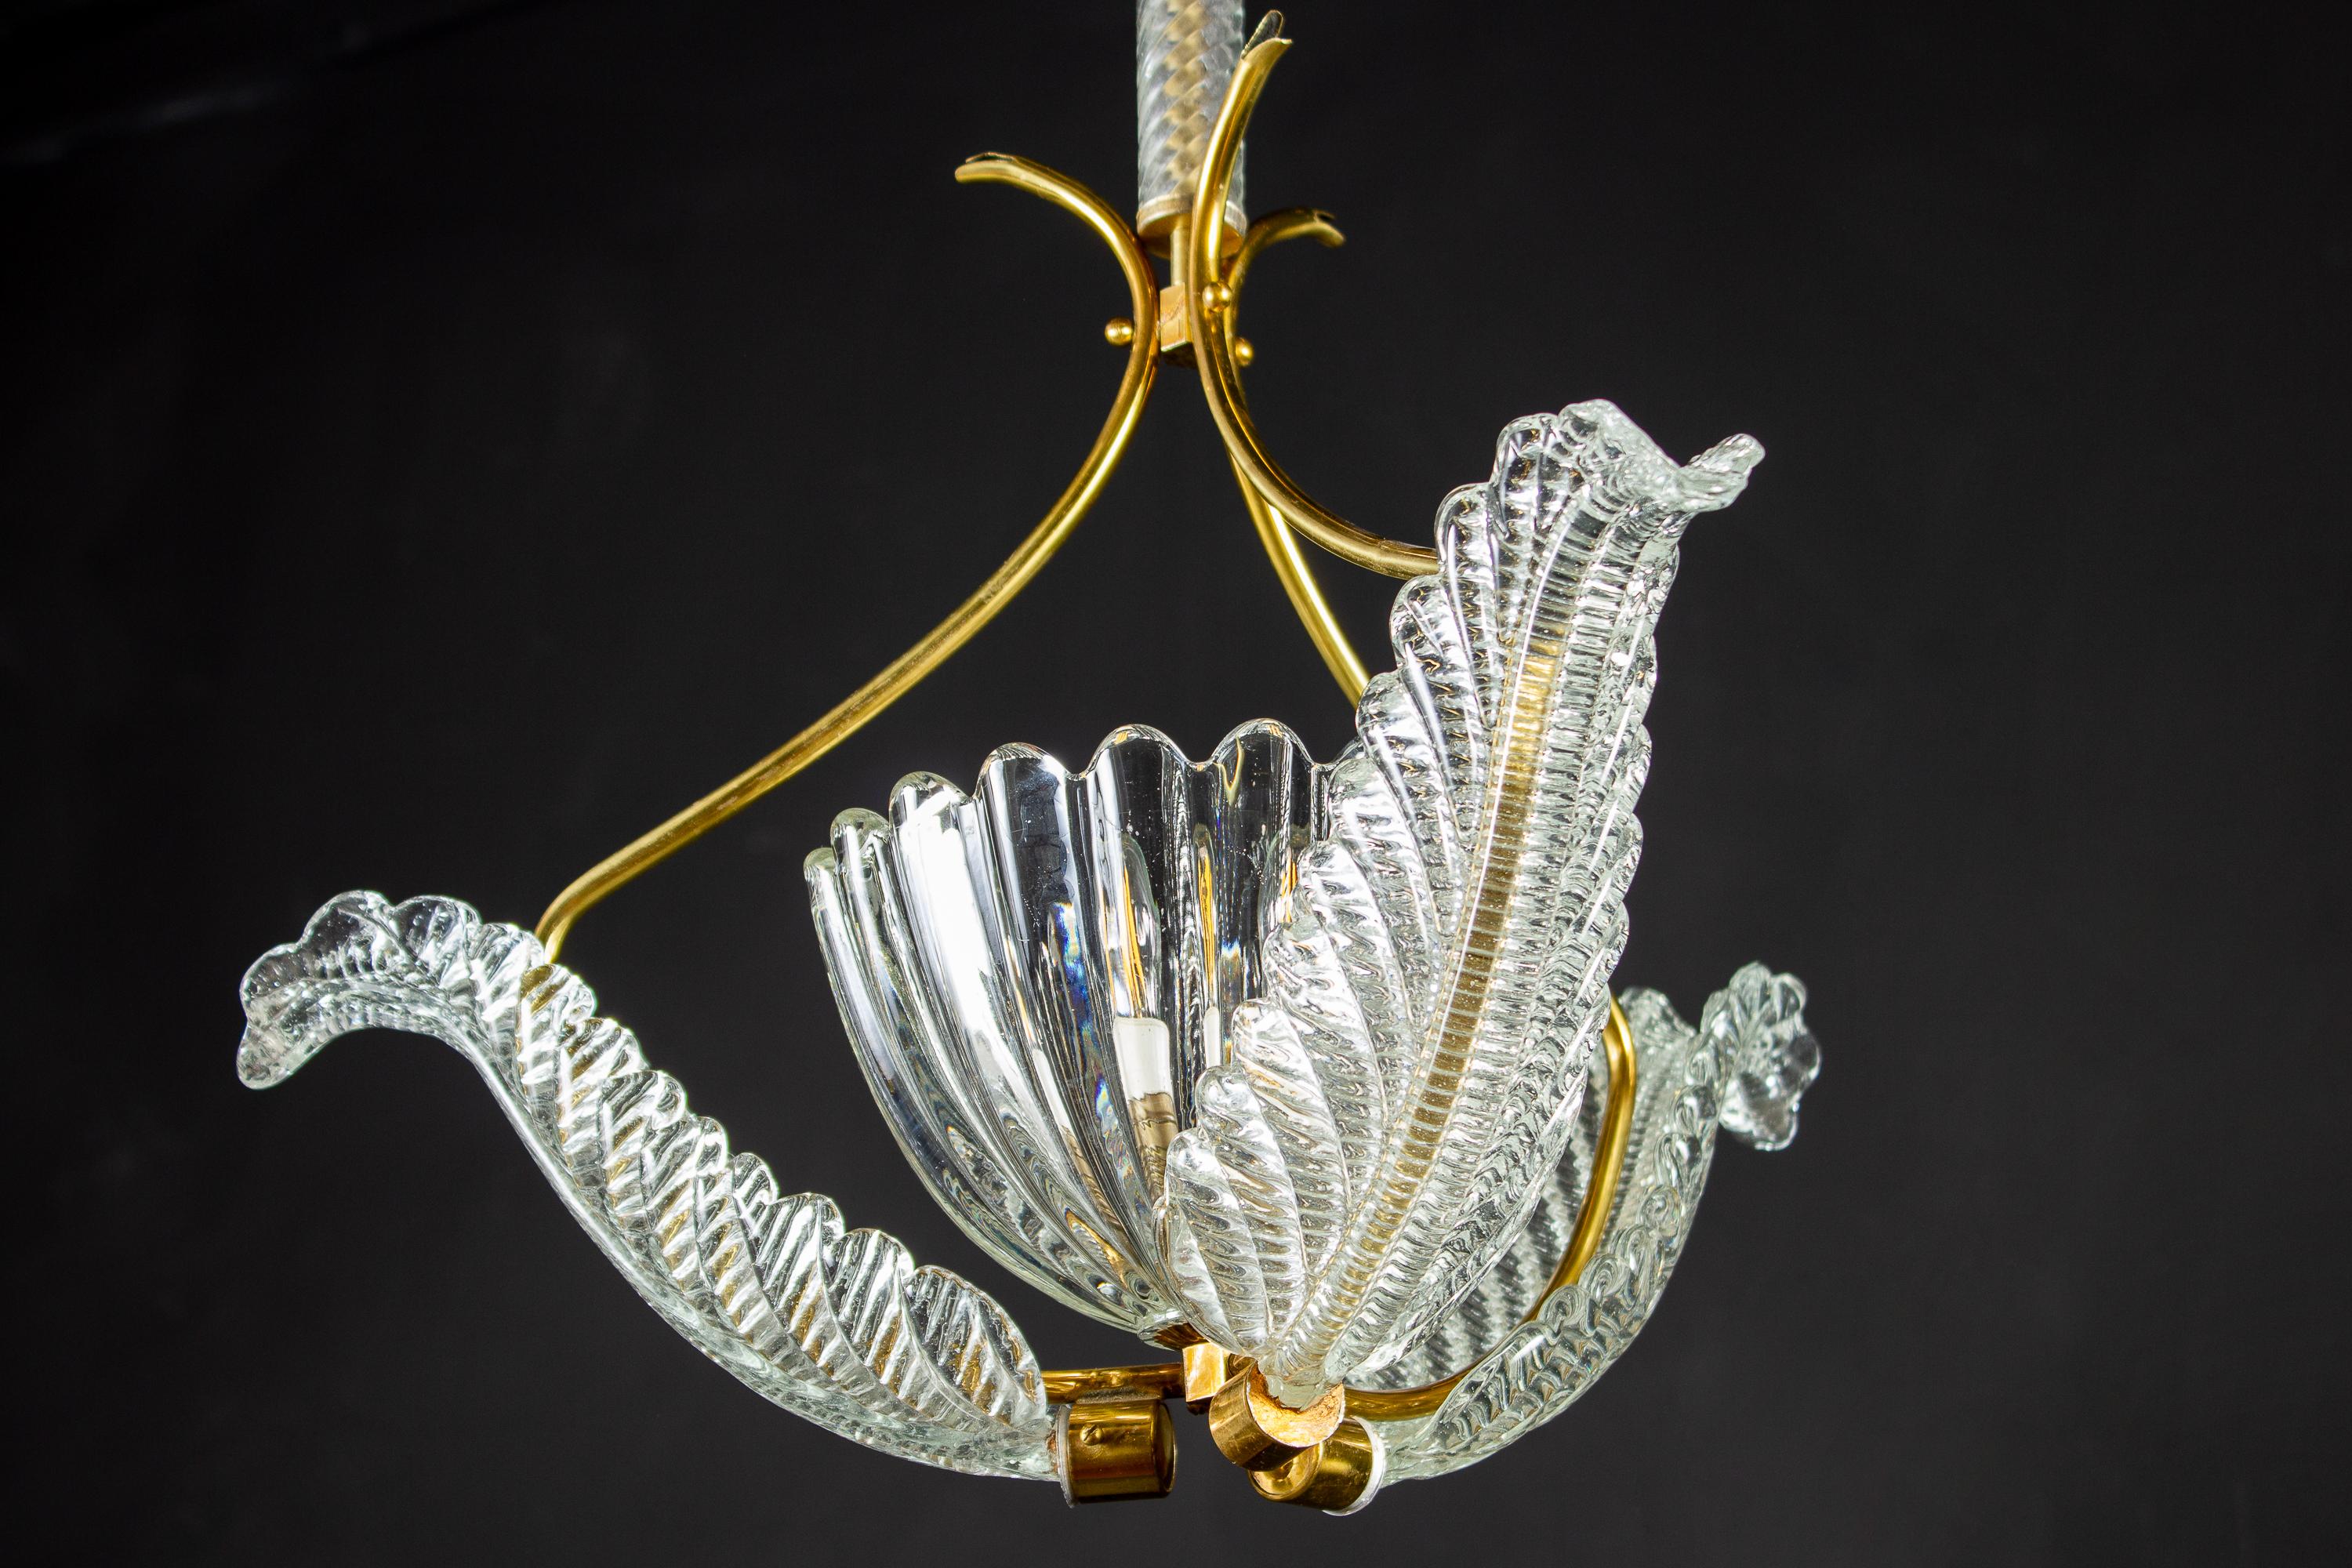 Glass Pair of Liberty Pendants or Lanterns by Ercole Barovier, 1940s For Sale